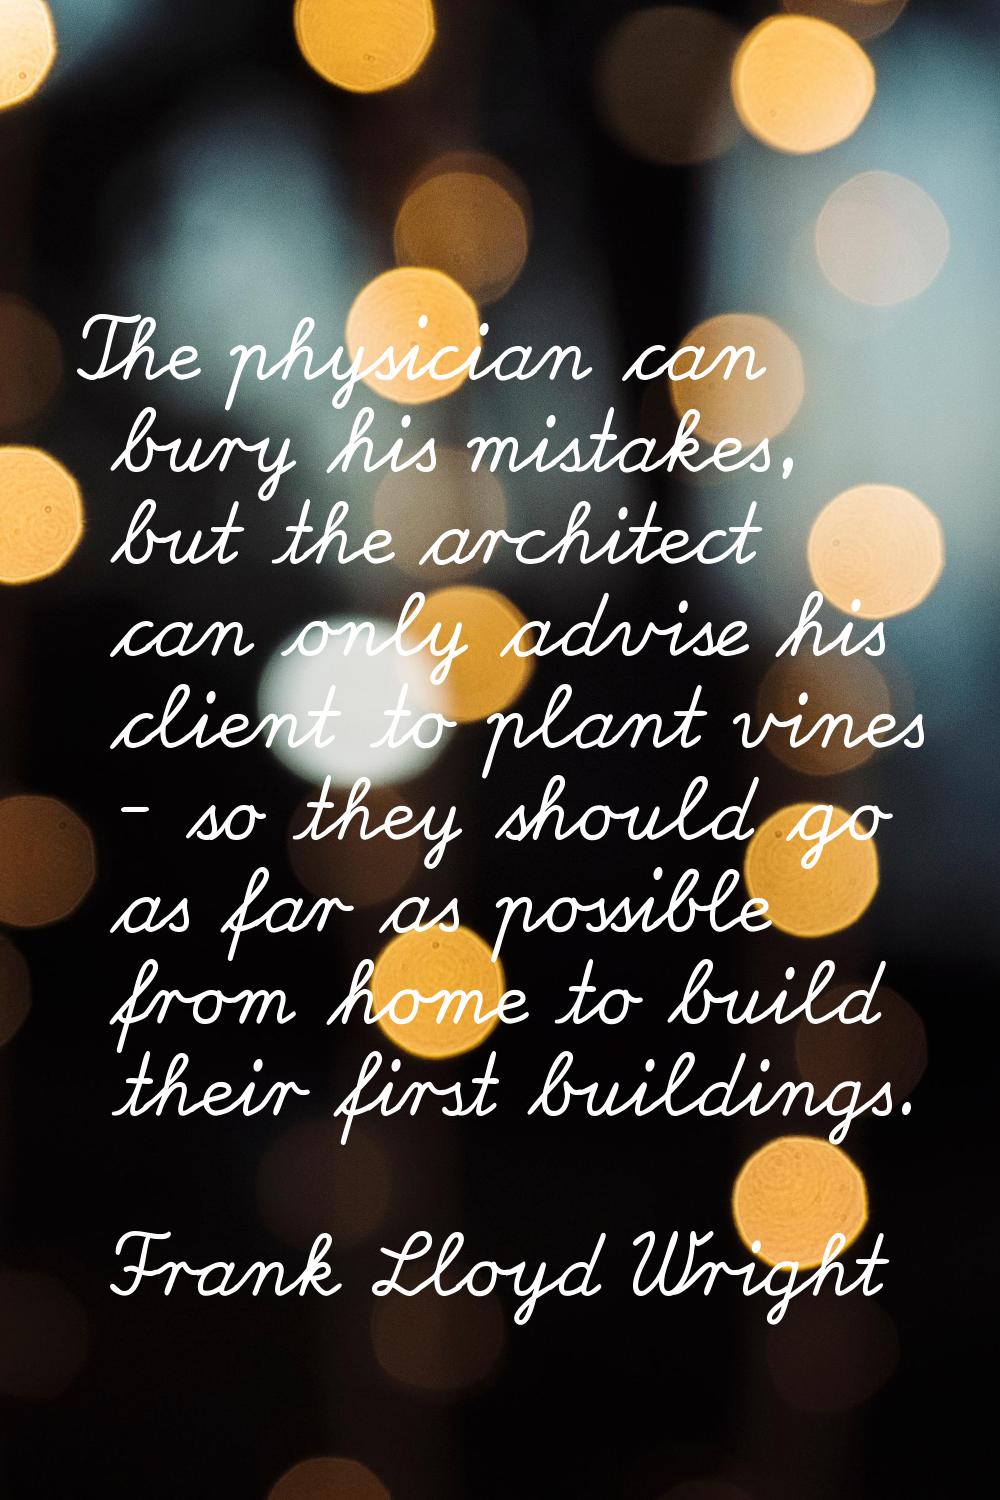 The physician can bury his mistakes, but the architect can only advise his client to plant vines - 